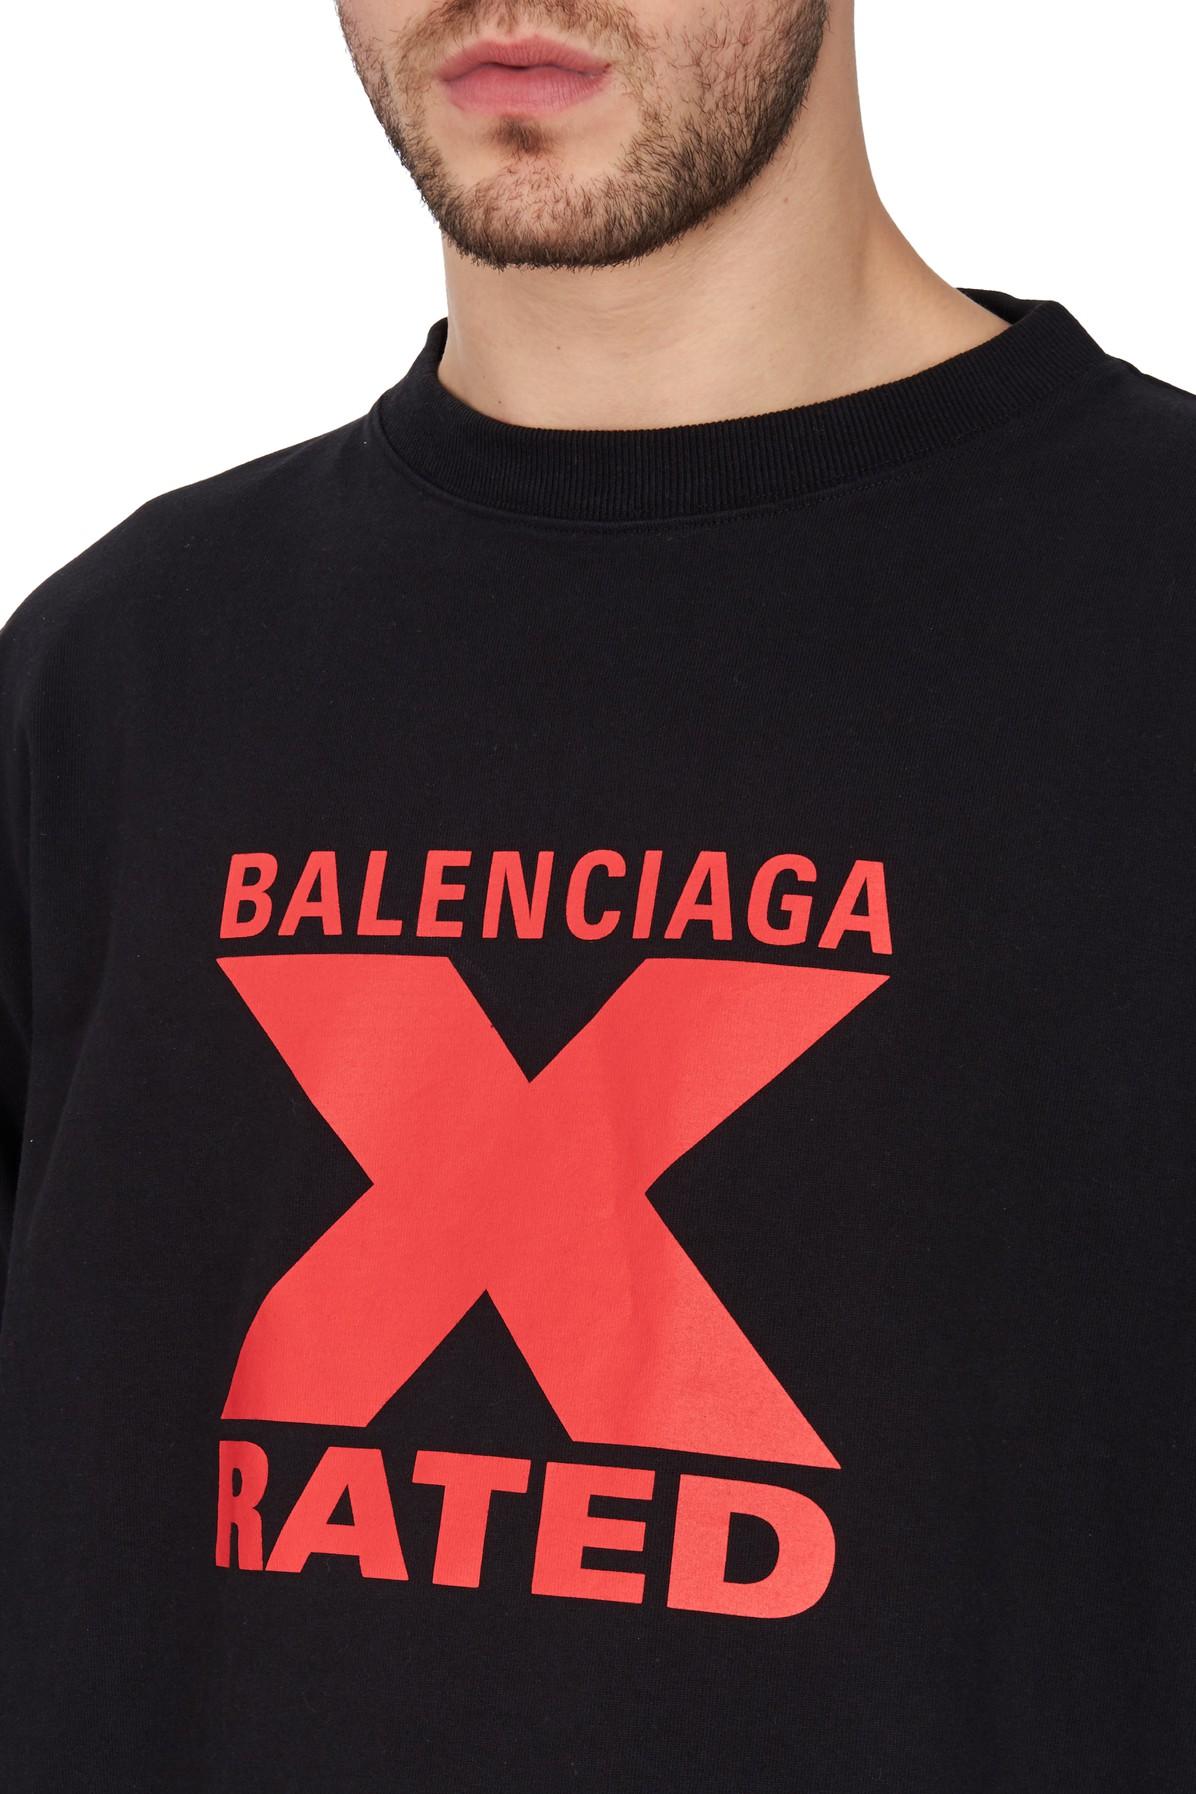 Balenciaga X Rated Large Fit T-shirt in Black for Men | Lyst